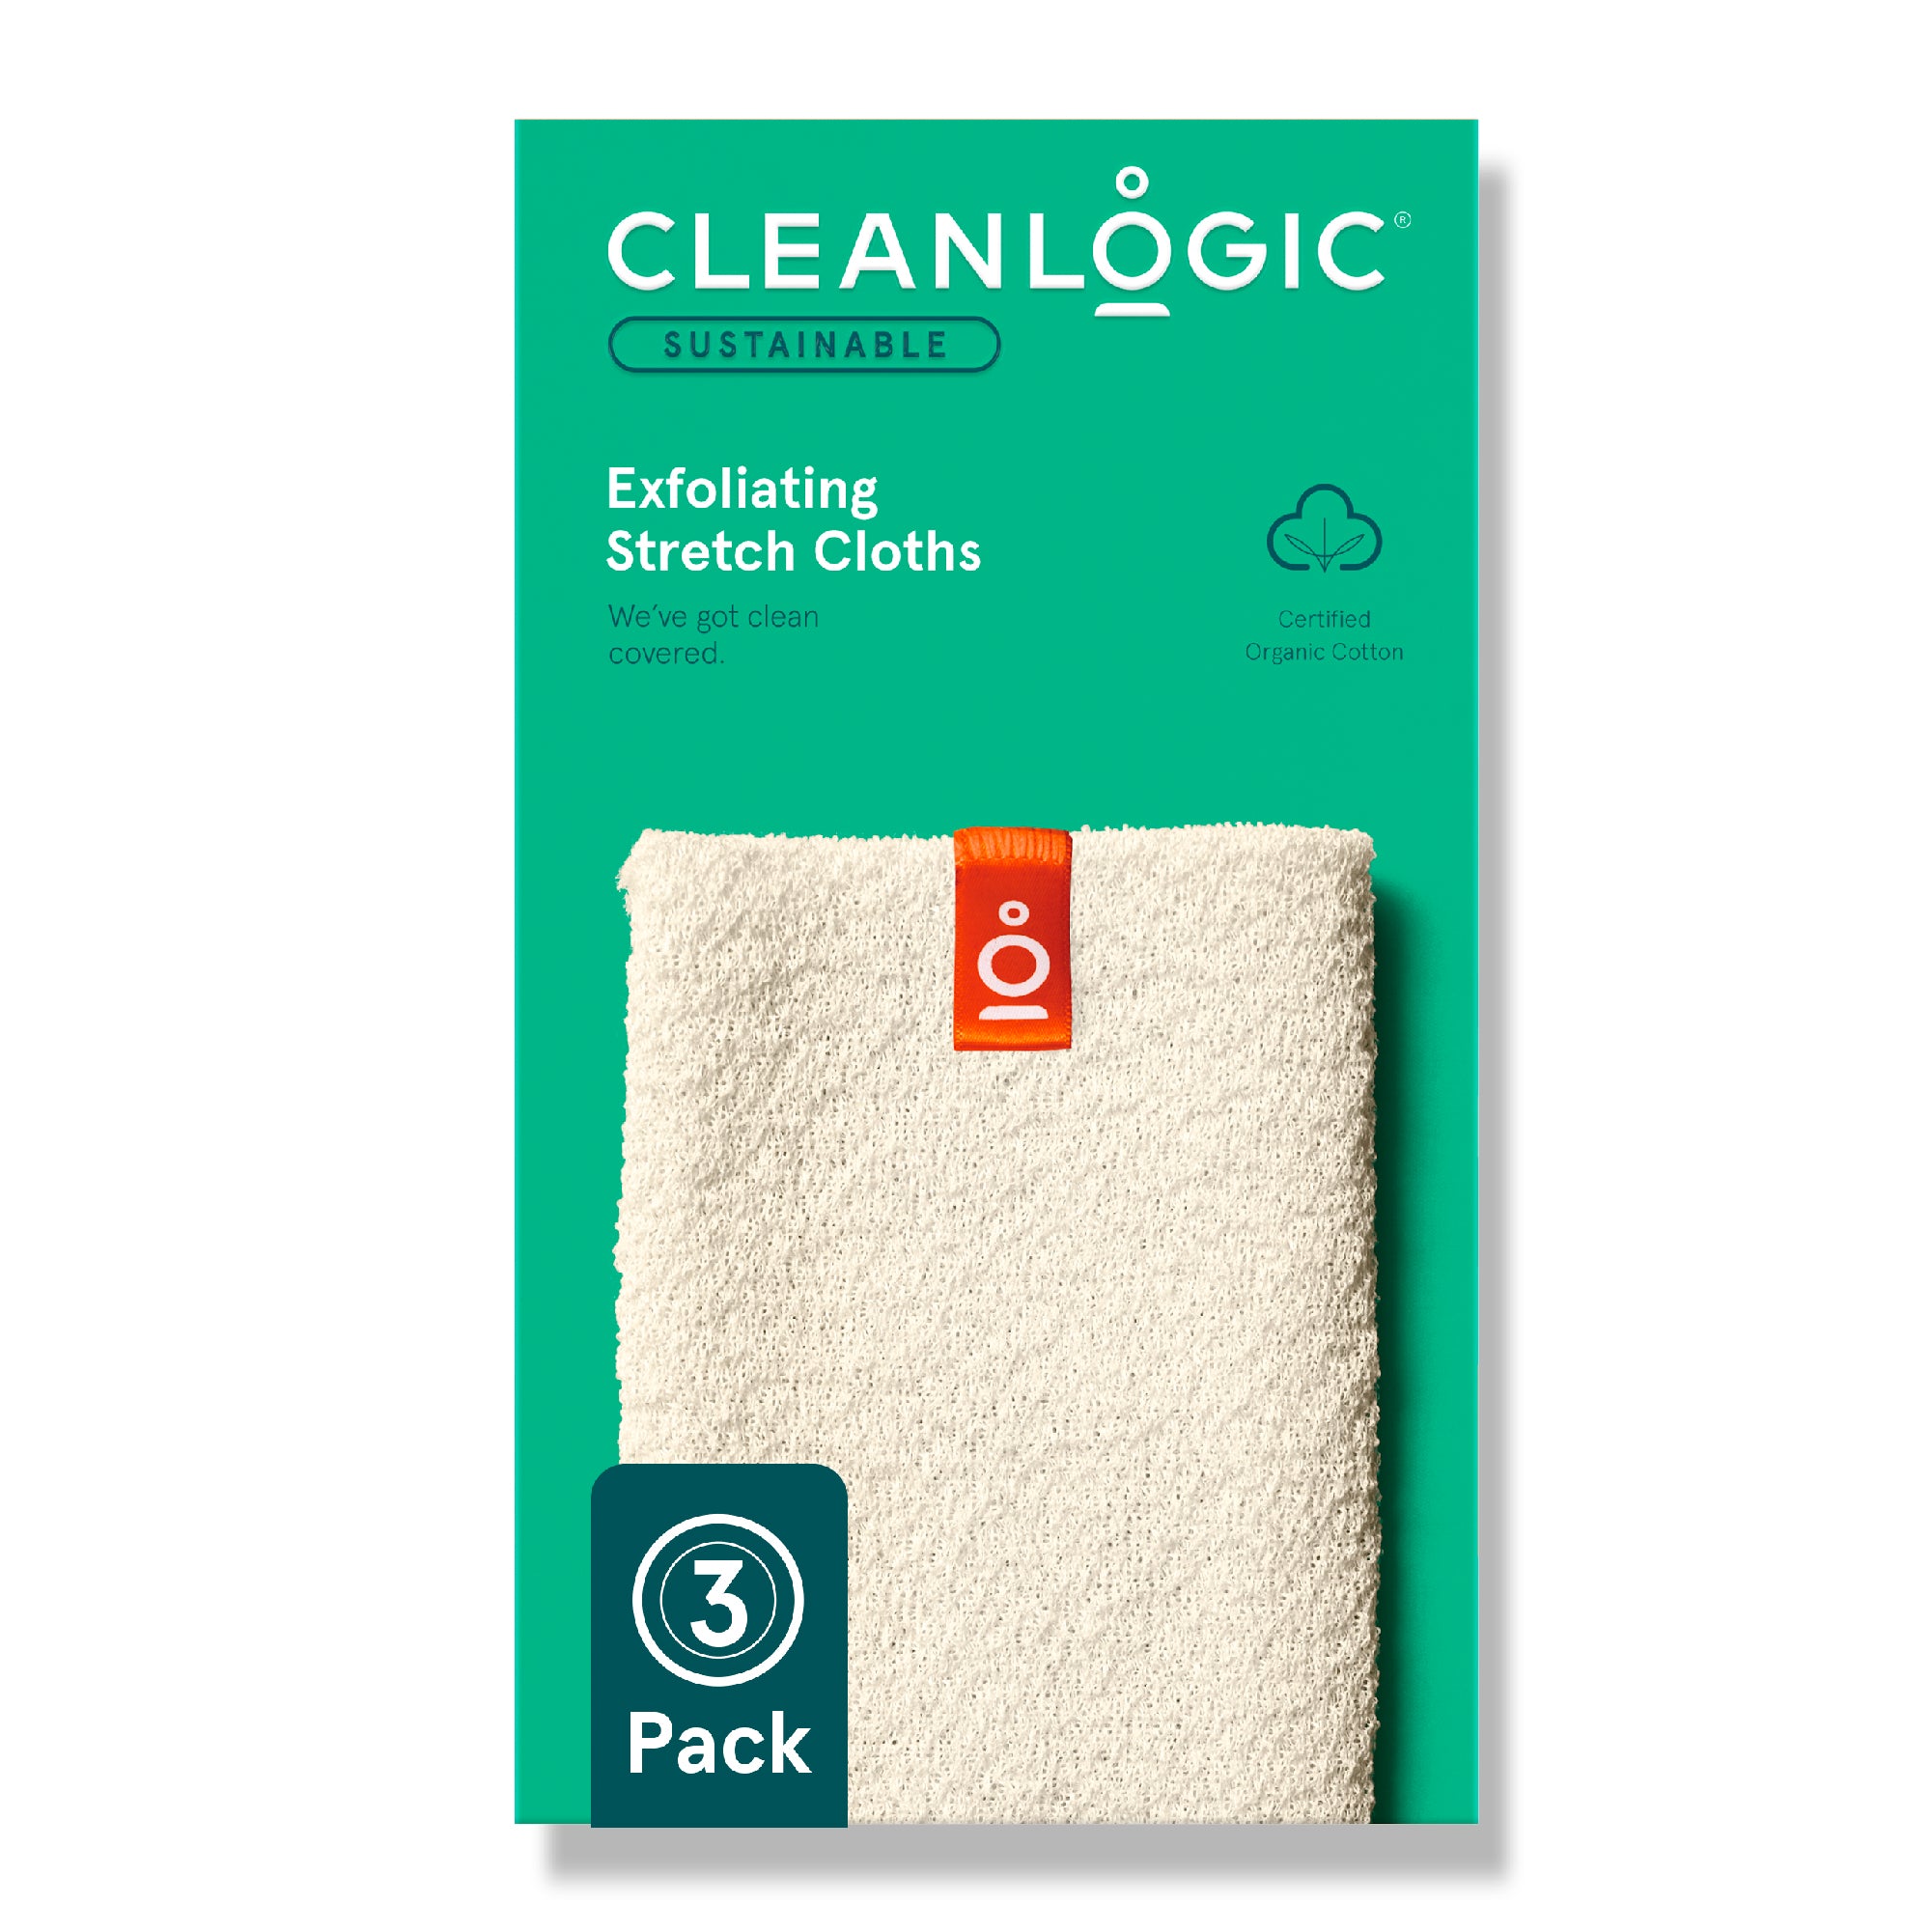 Sustainable Exfoliating Stretch Cloths, 3 Count